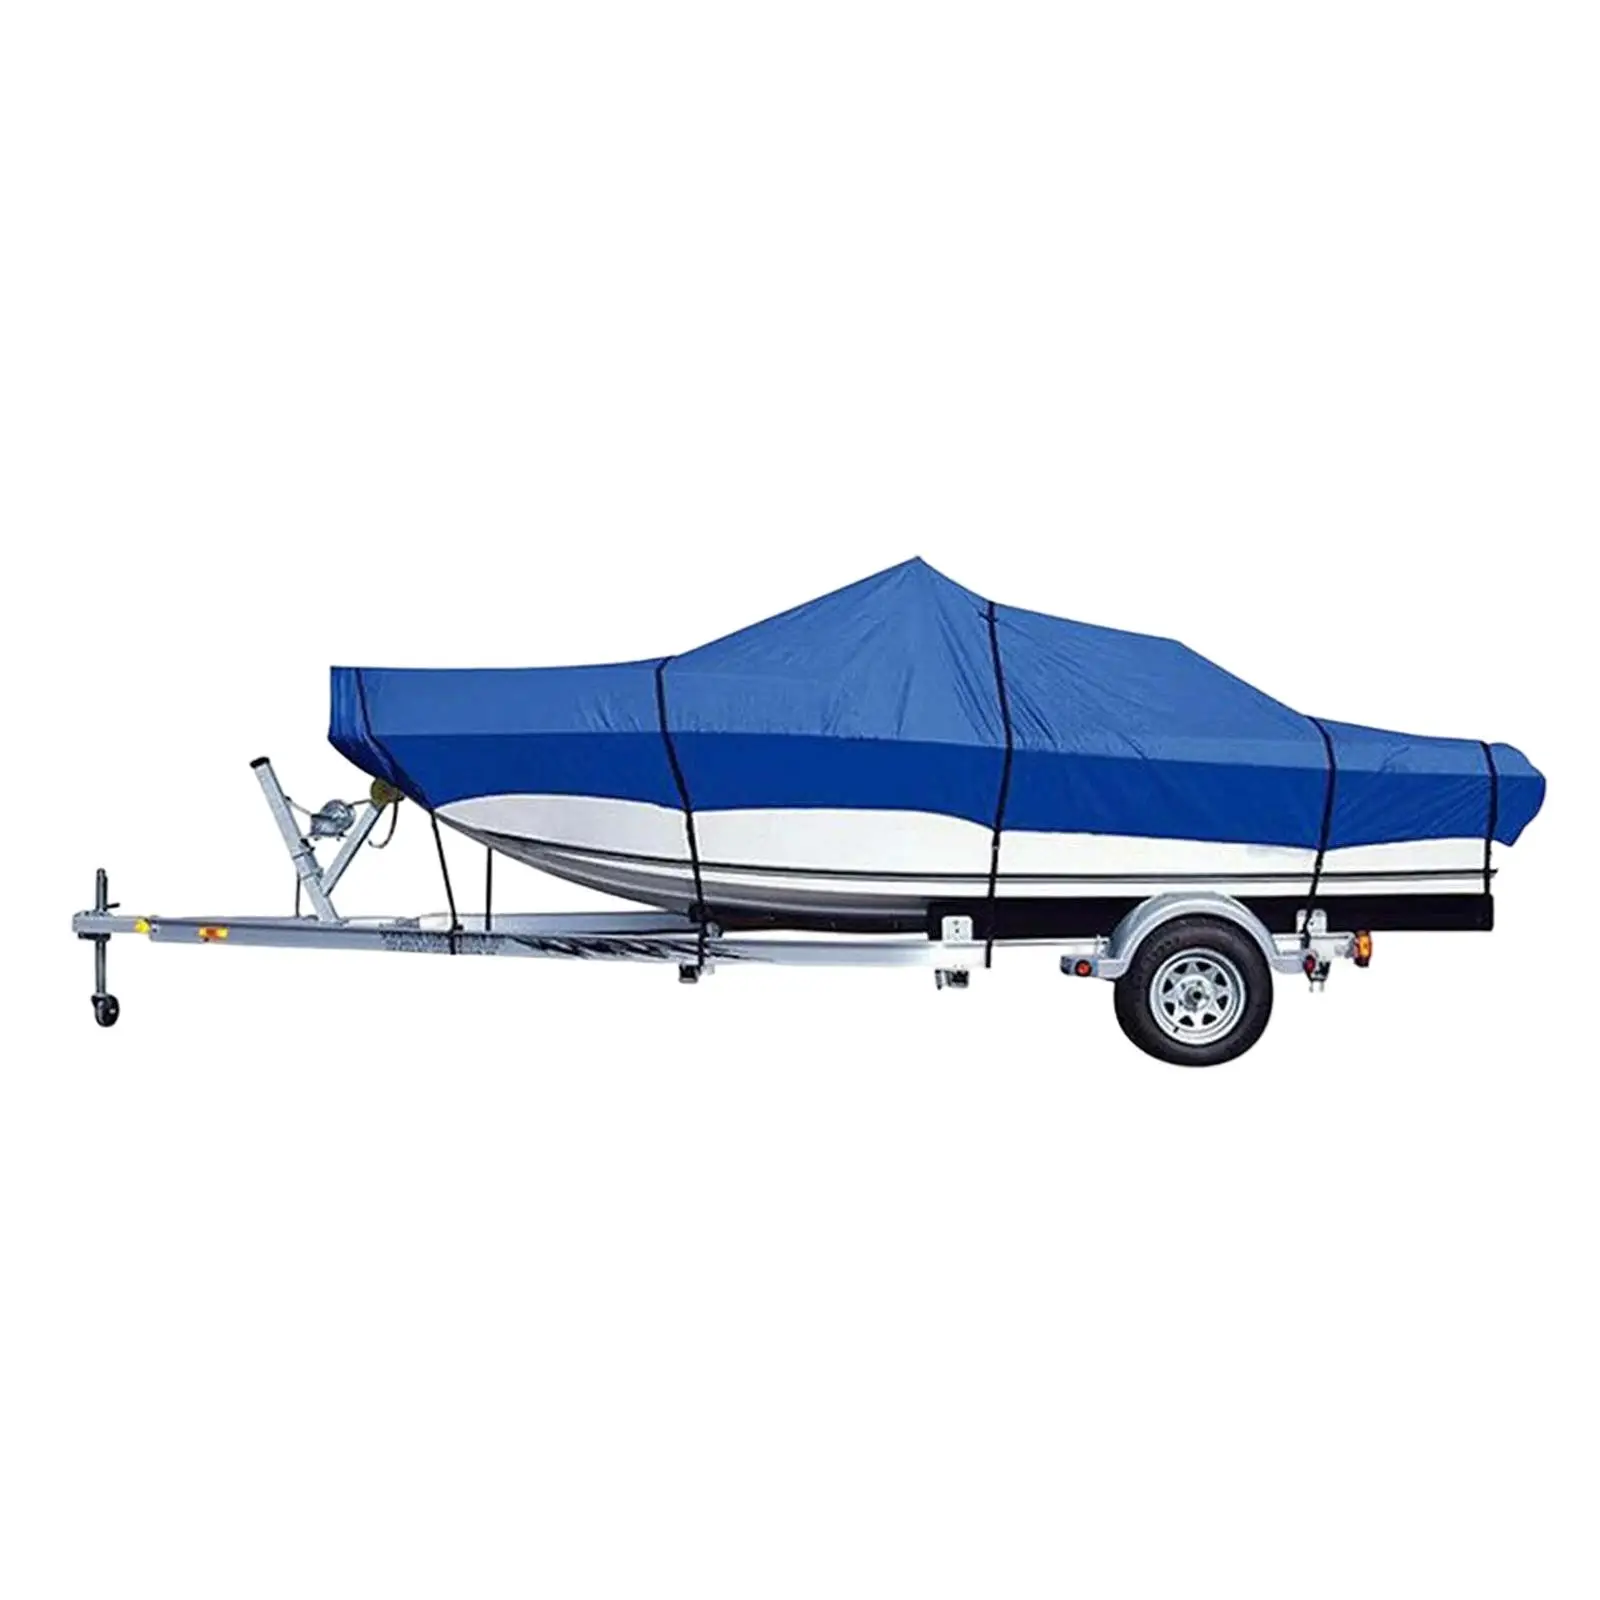 210 Cloth Kayak Boat Cover,   Marine Outboard Cover with Drawstring Strap Waterproof Fit for  Shield 